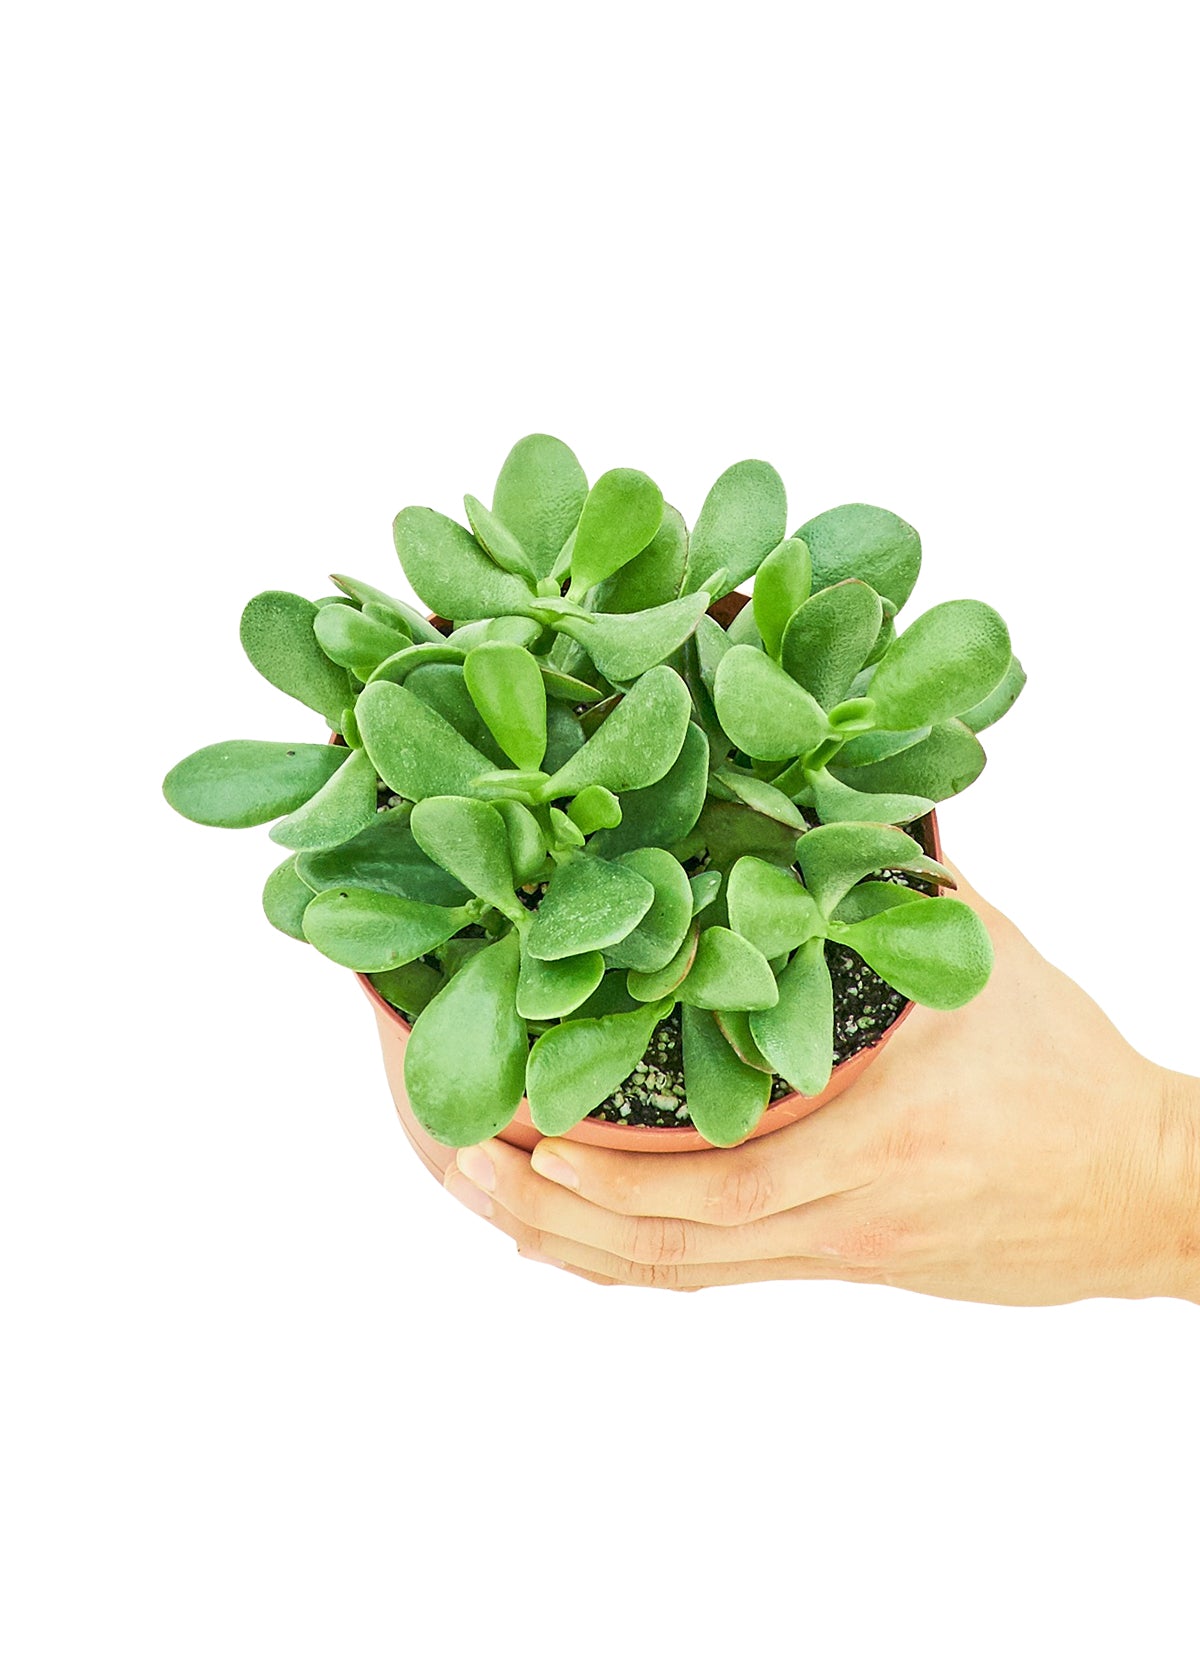 Medium size Jade Plant in a growers pot with a white background with a hand holding the pot to see the top view